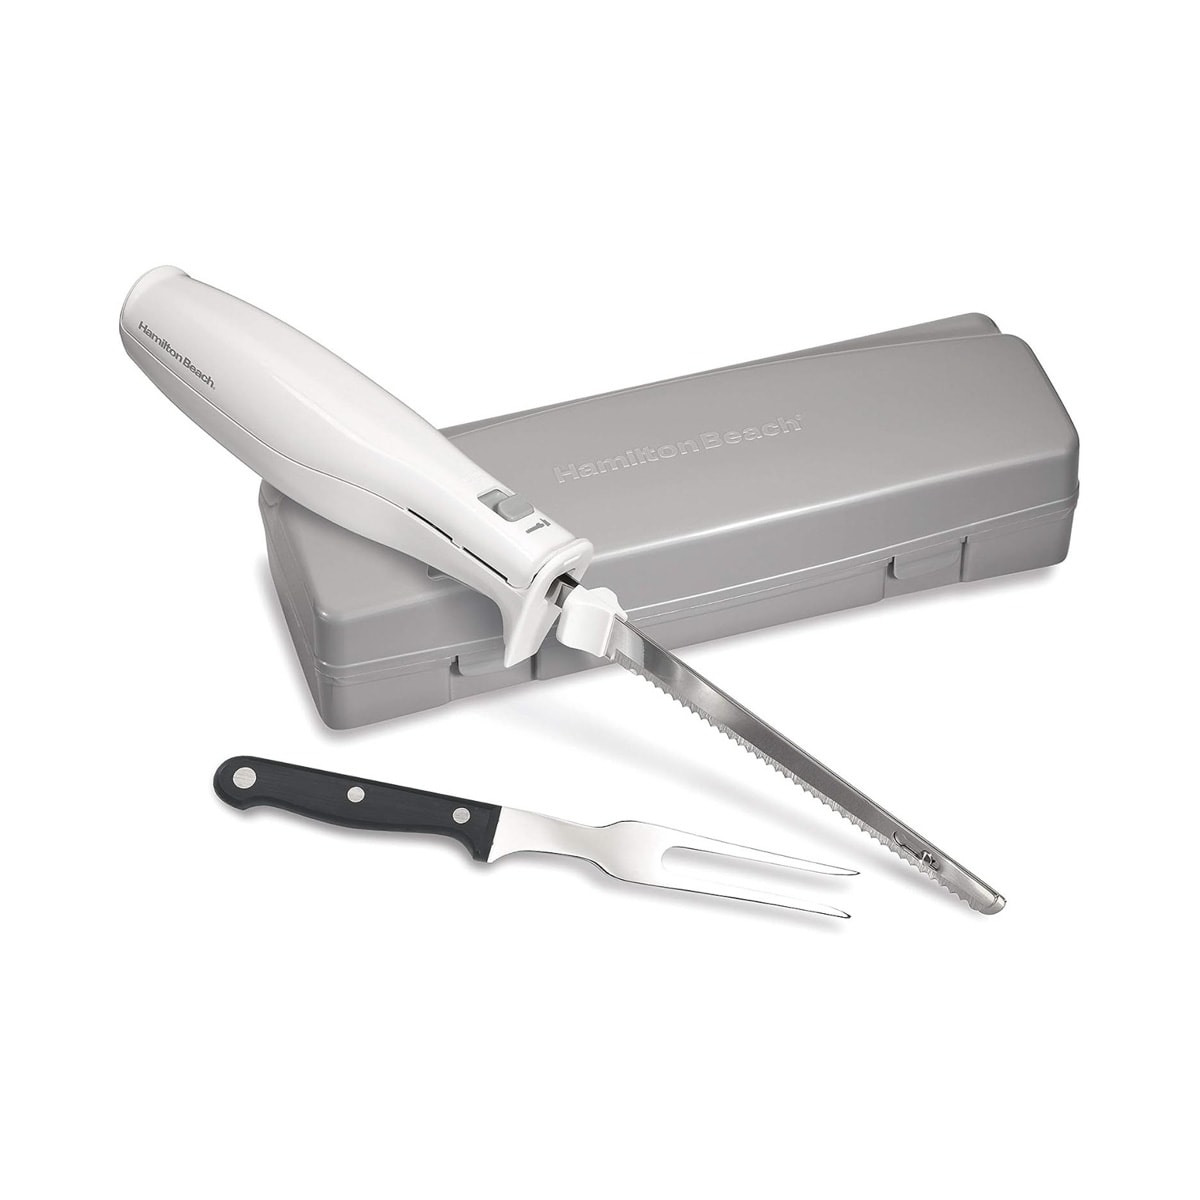 Electric carving knife.